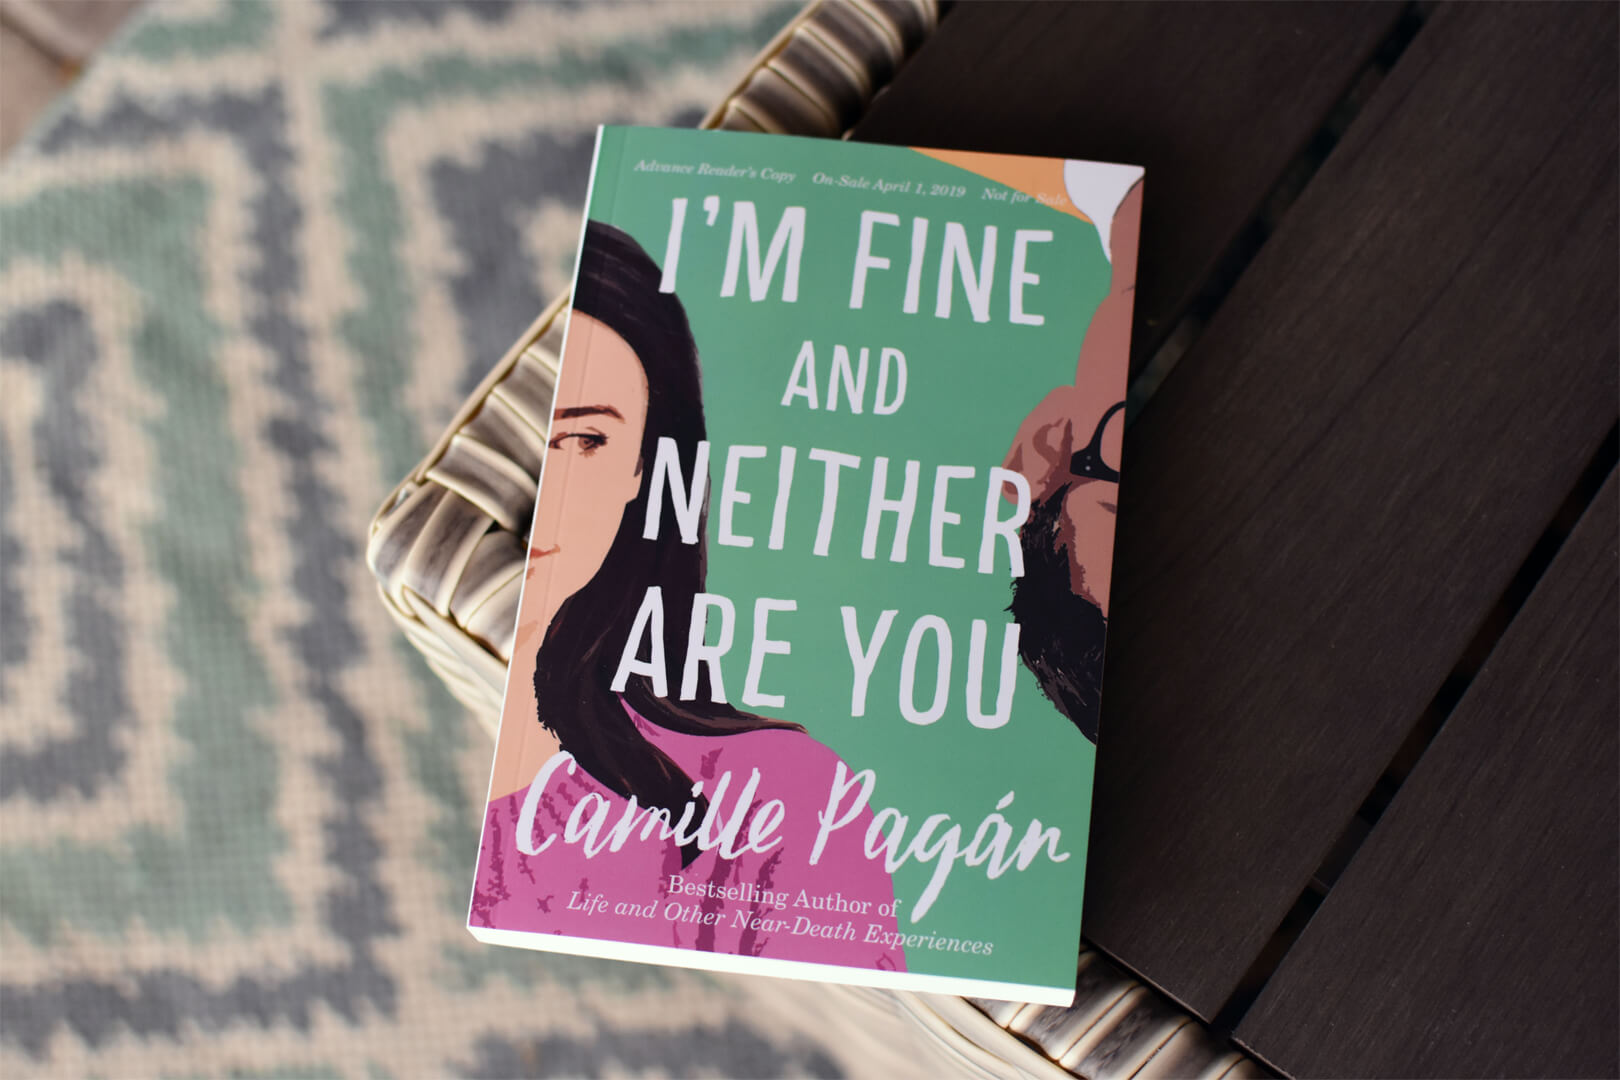 Review: I’m Fine and Neither Are You by Camille Pagán